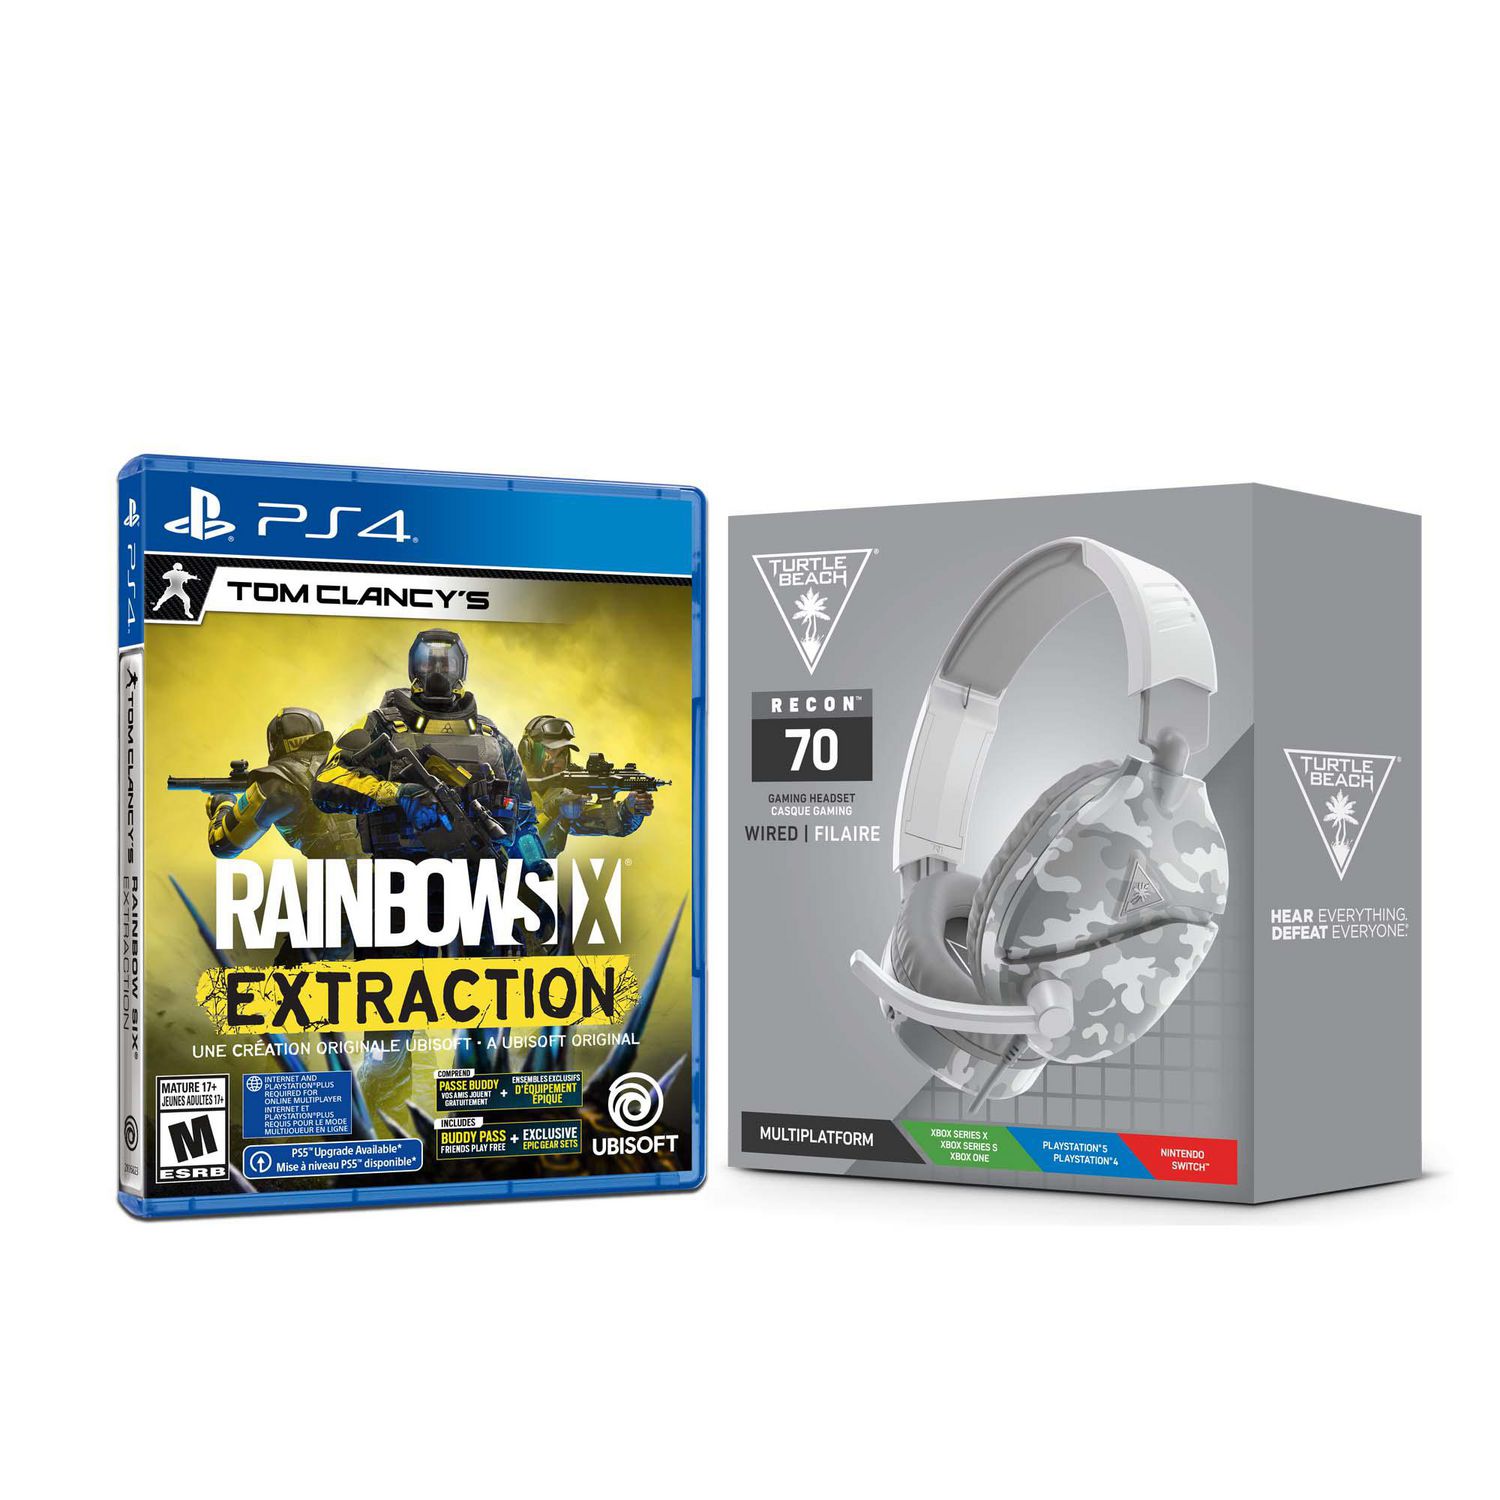 Turtle Beach Recon 70P Casque Gaming - PS4, PS5, Xbox One